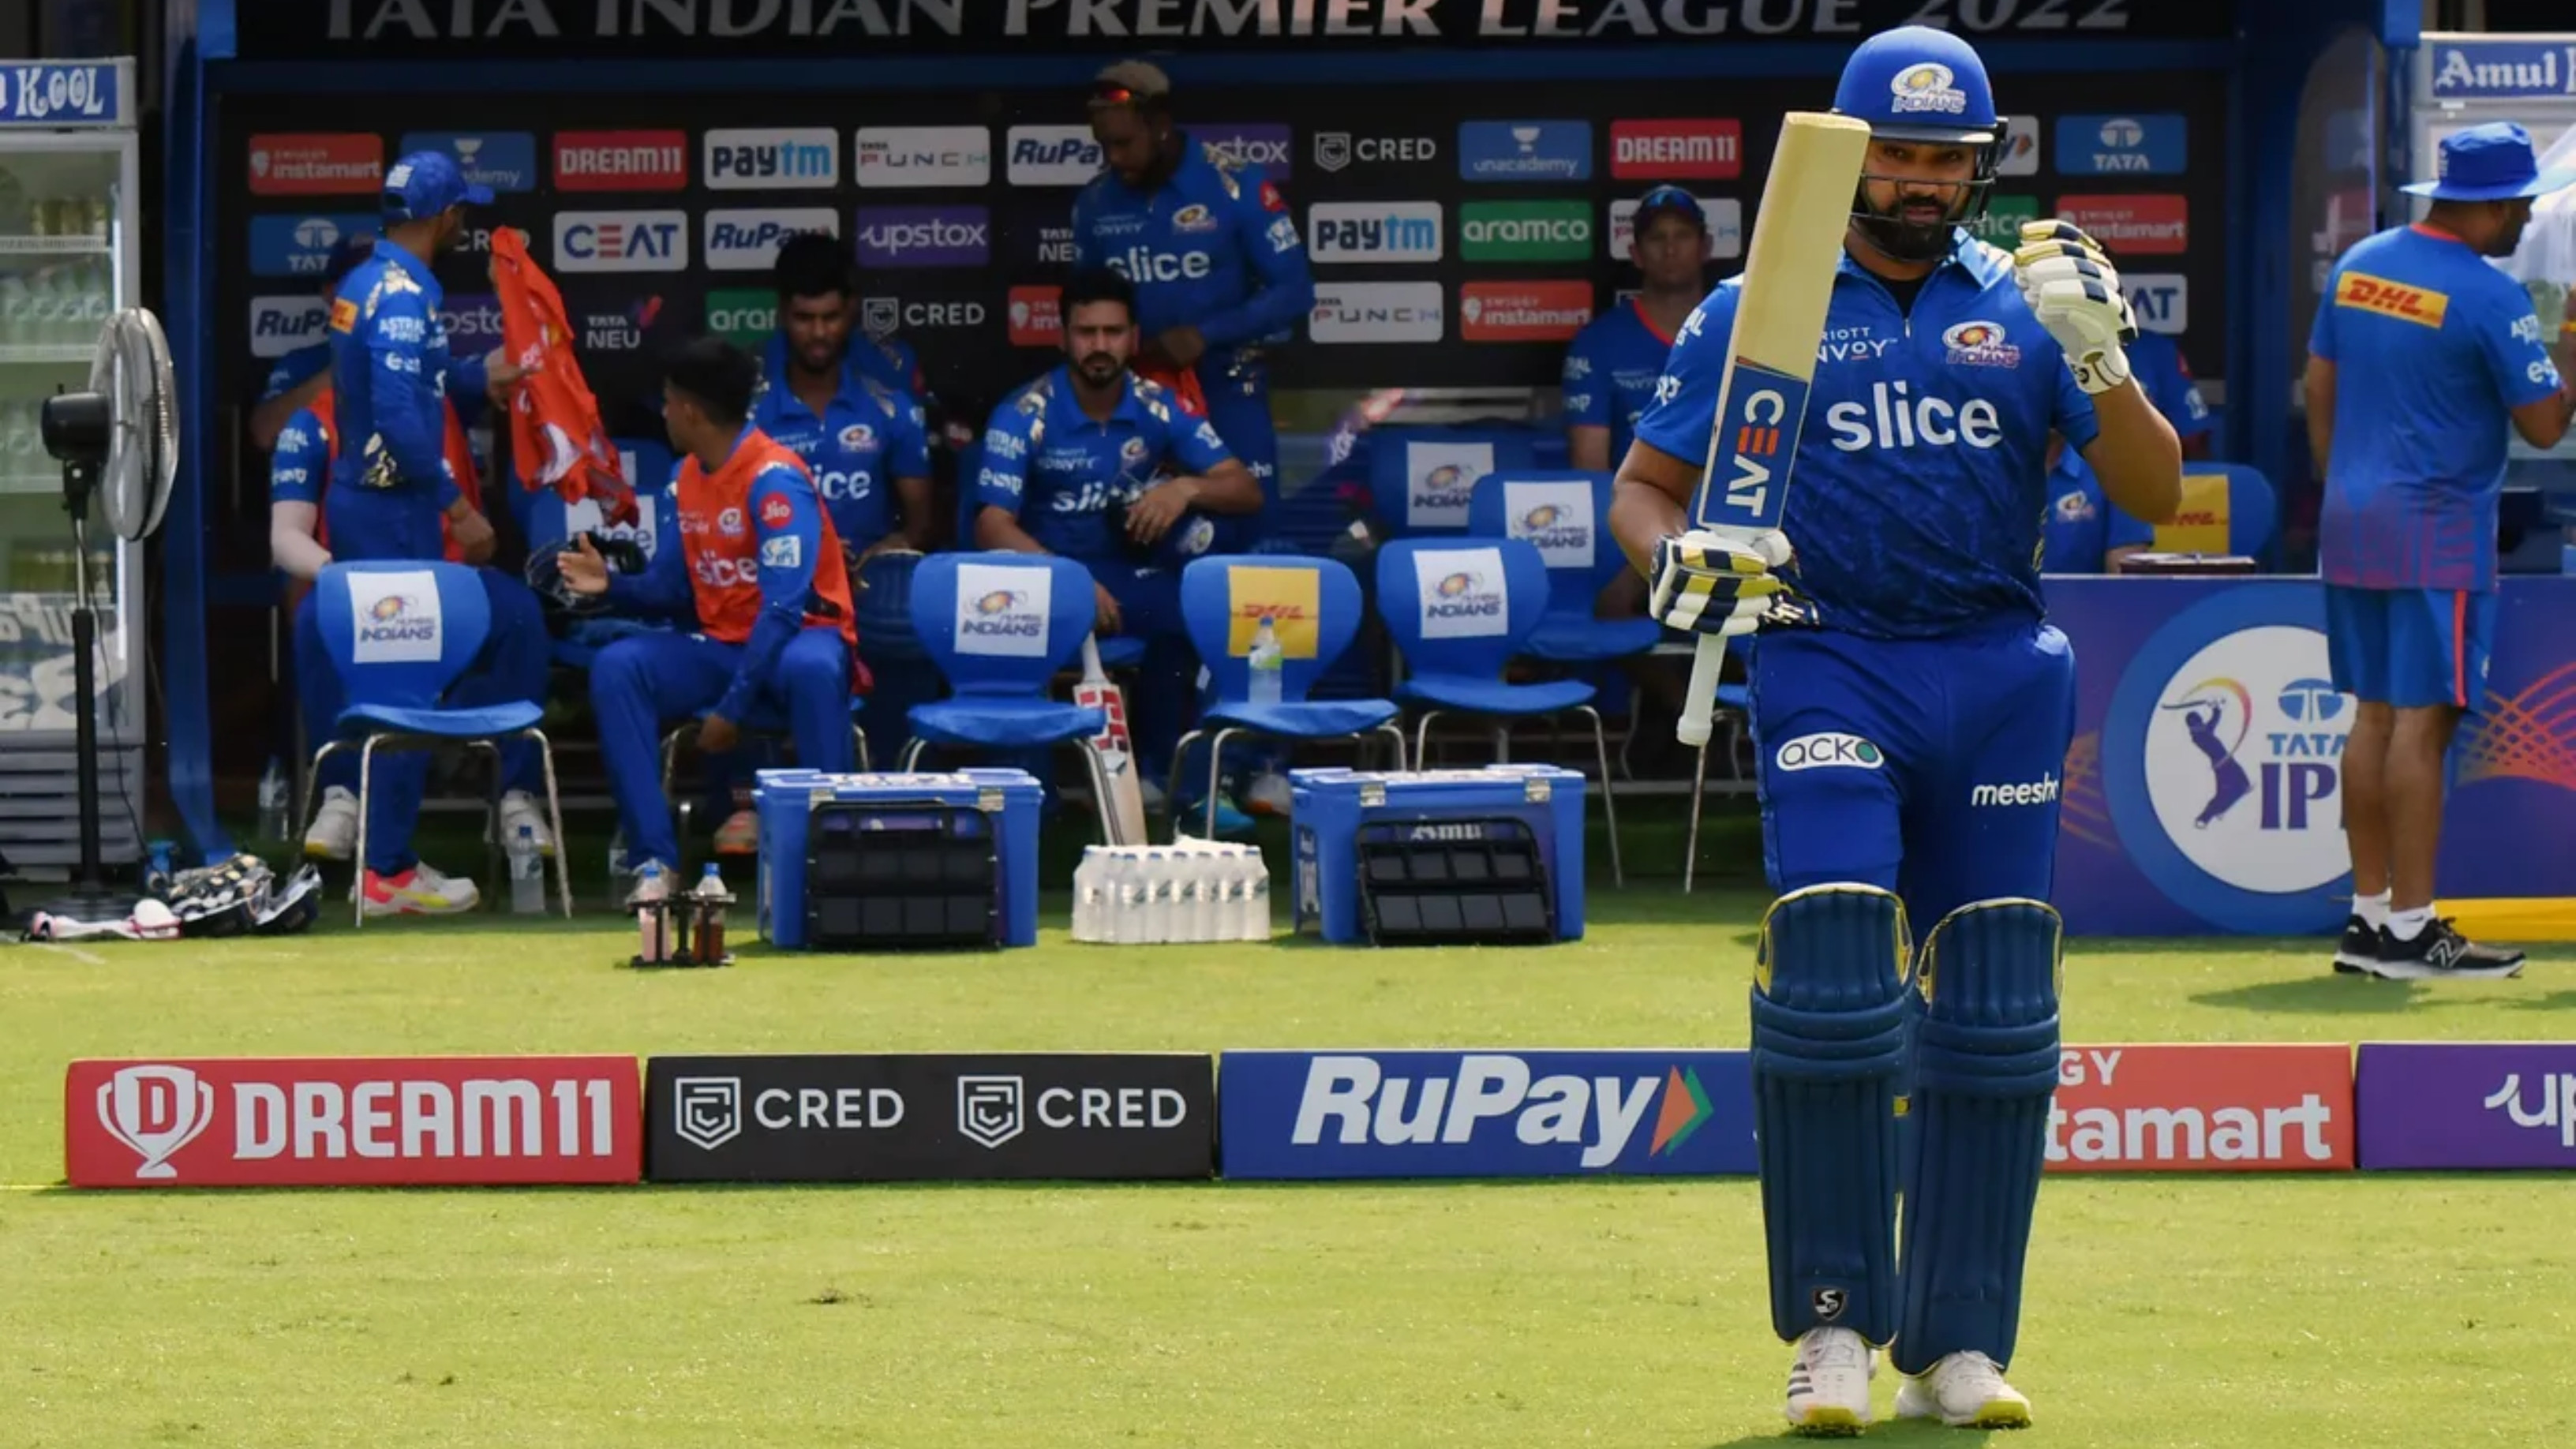 IPL 2022: MI skipper Rohit Sharma fined INR 12 lakhs for slow over-rate against DC